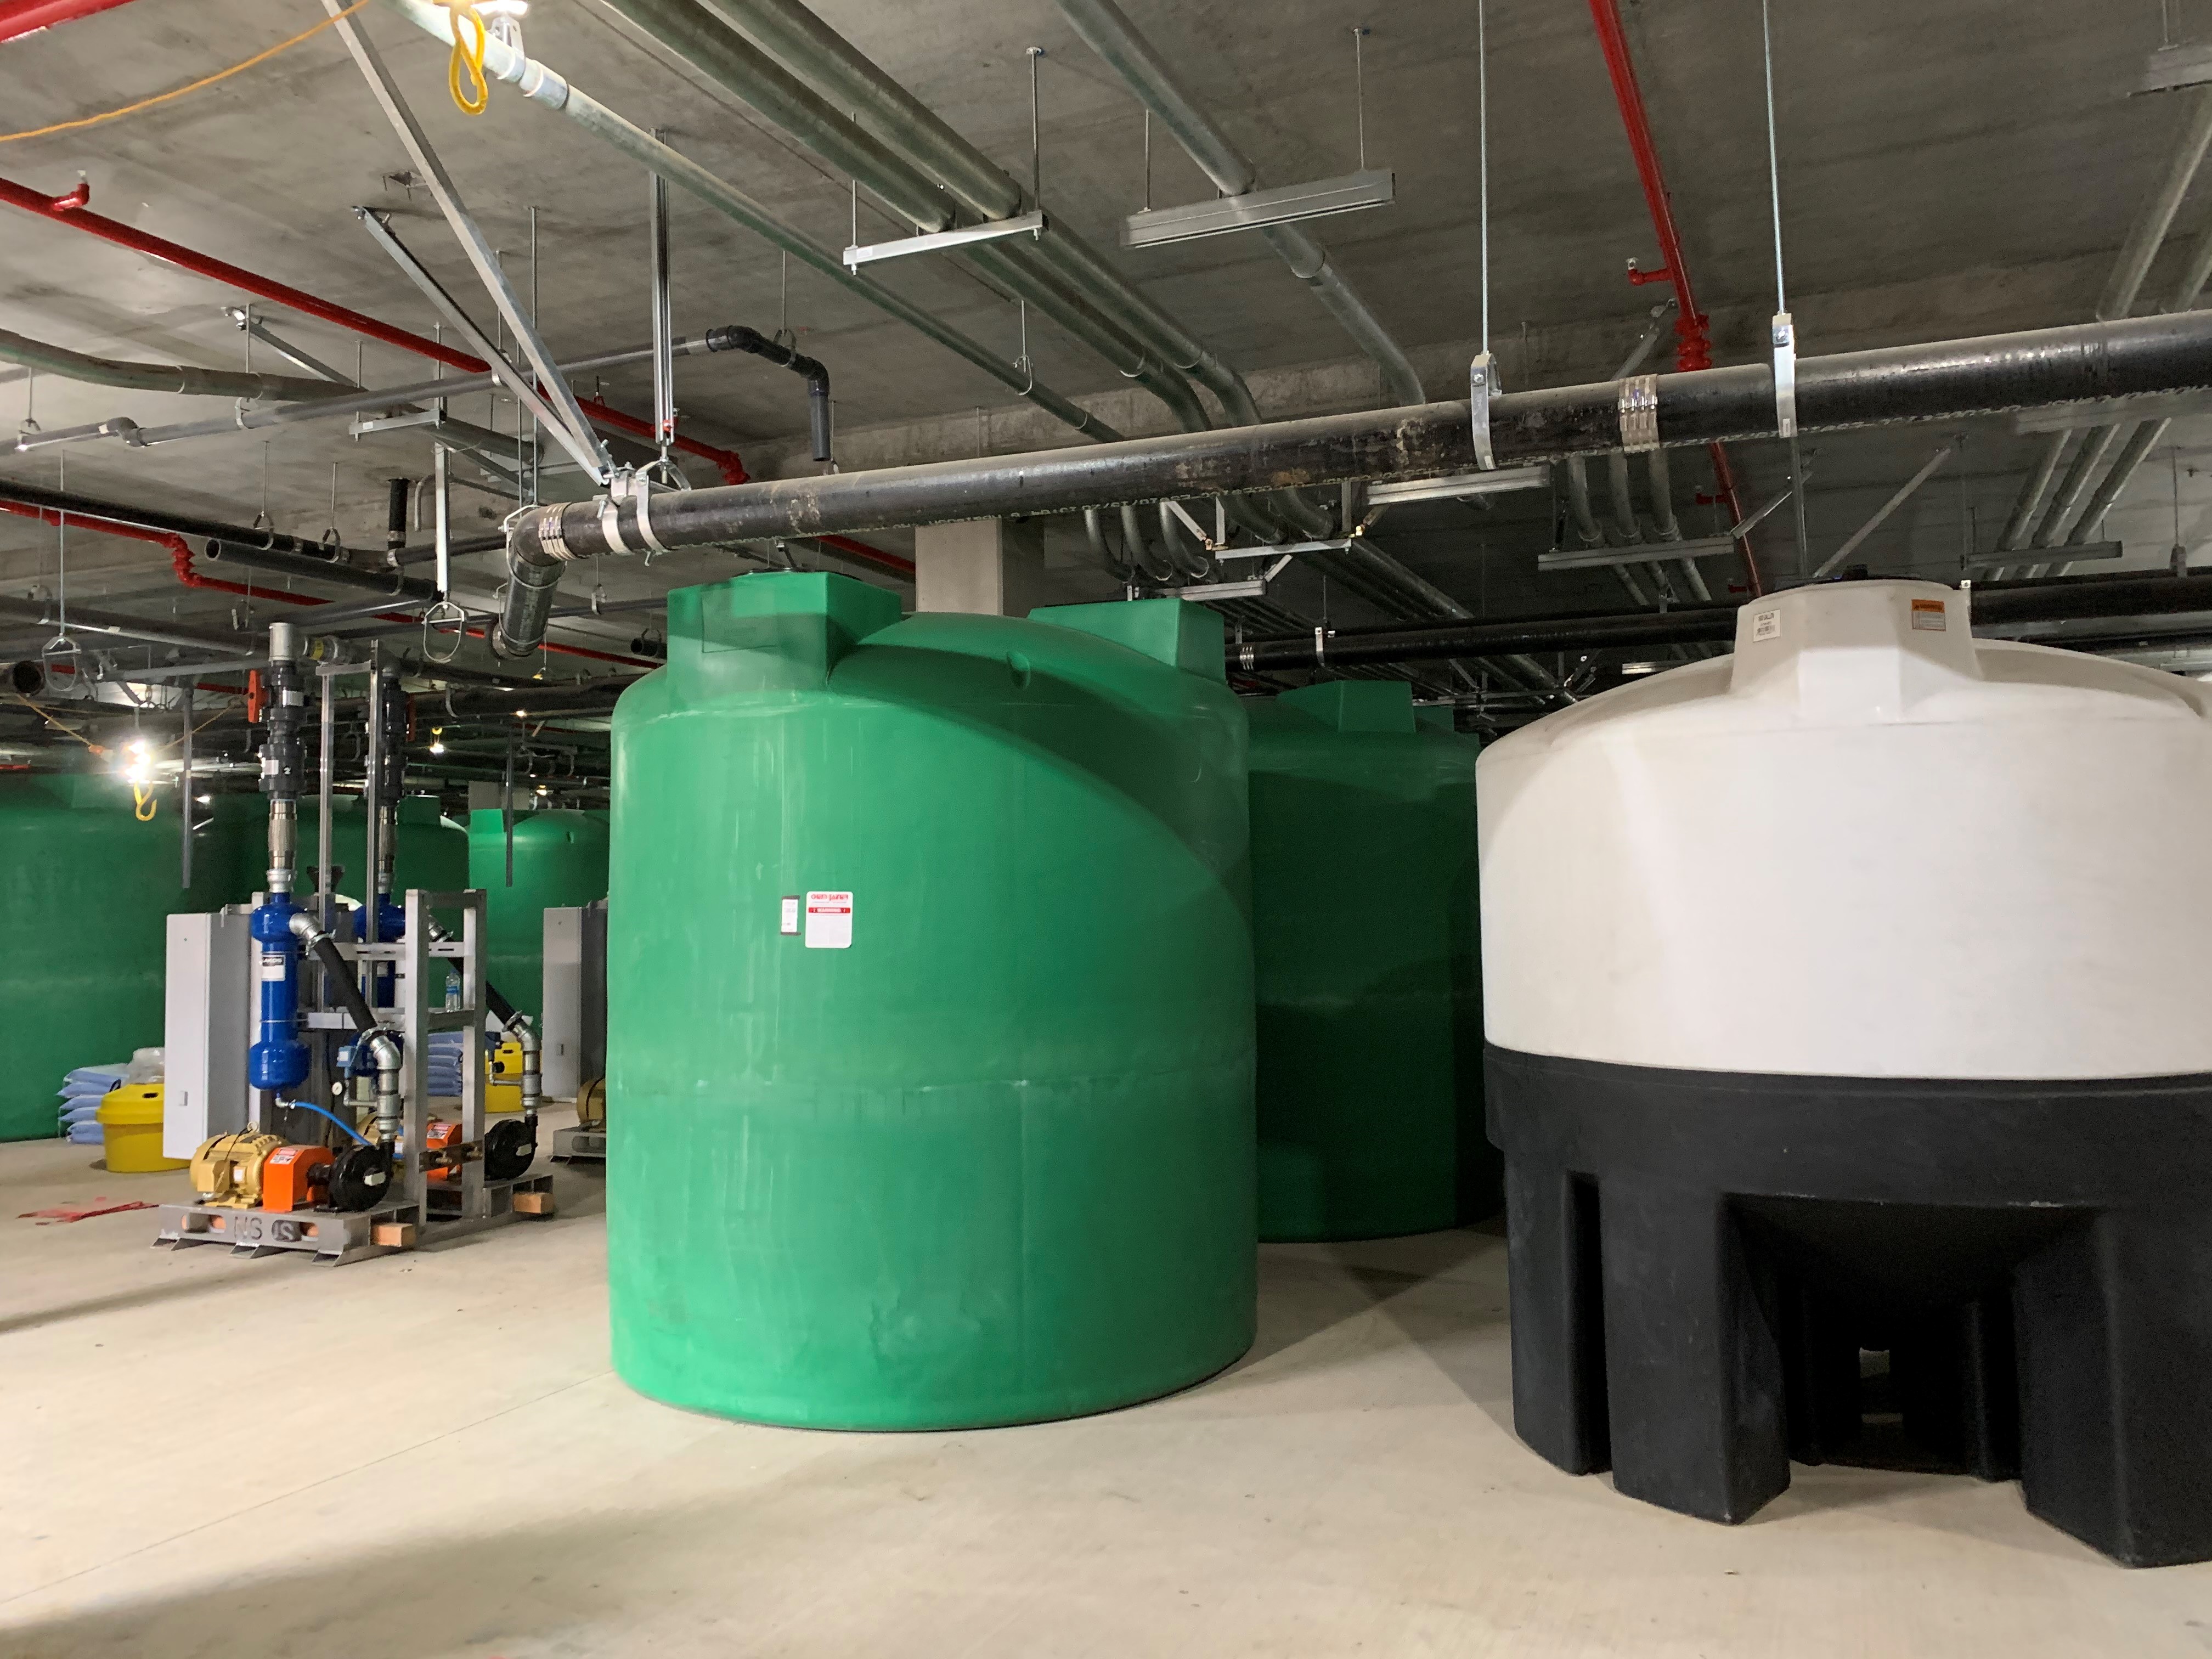 Reclaim Water Tanks in the Quick Turn Around (QTA) building at the Consolidated Rent-A-Car (ConRAC) facility.